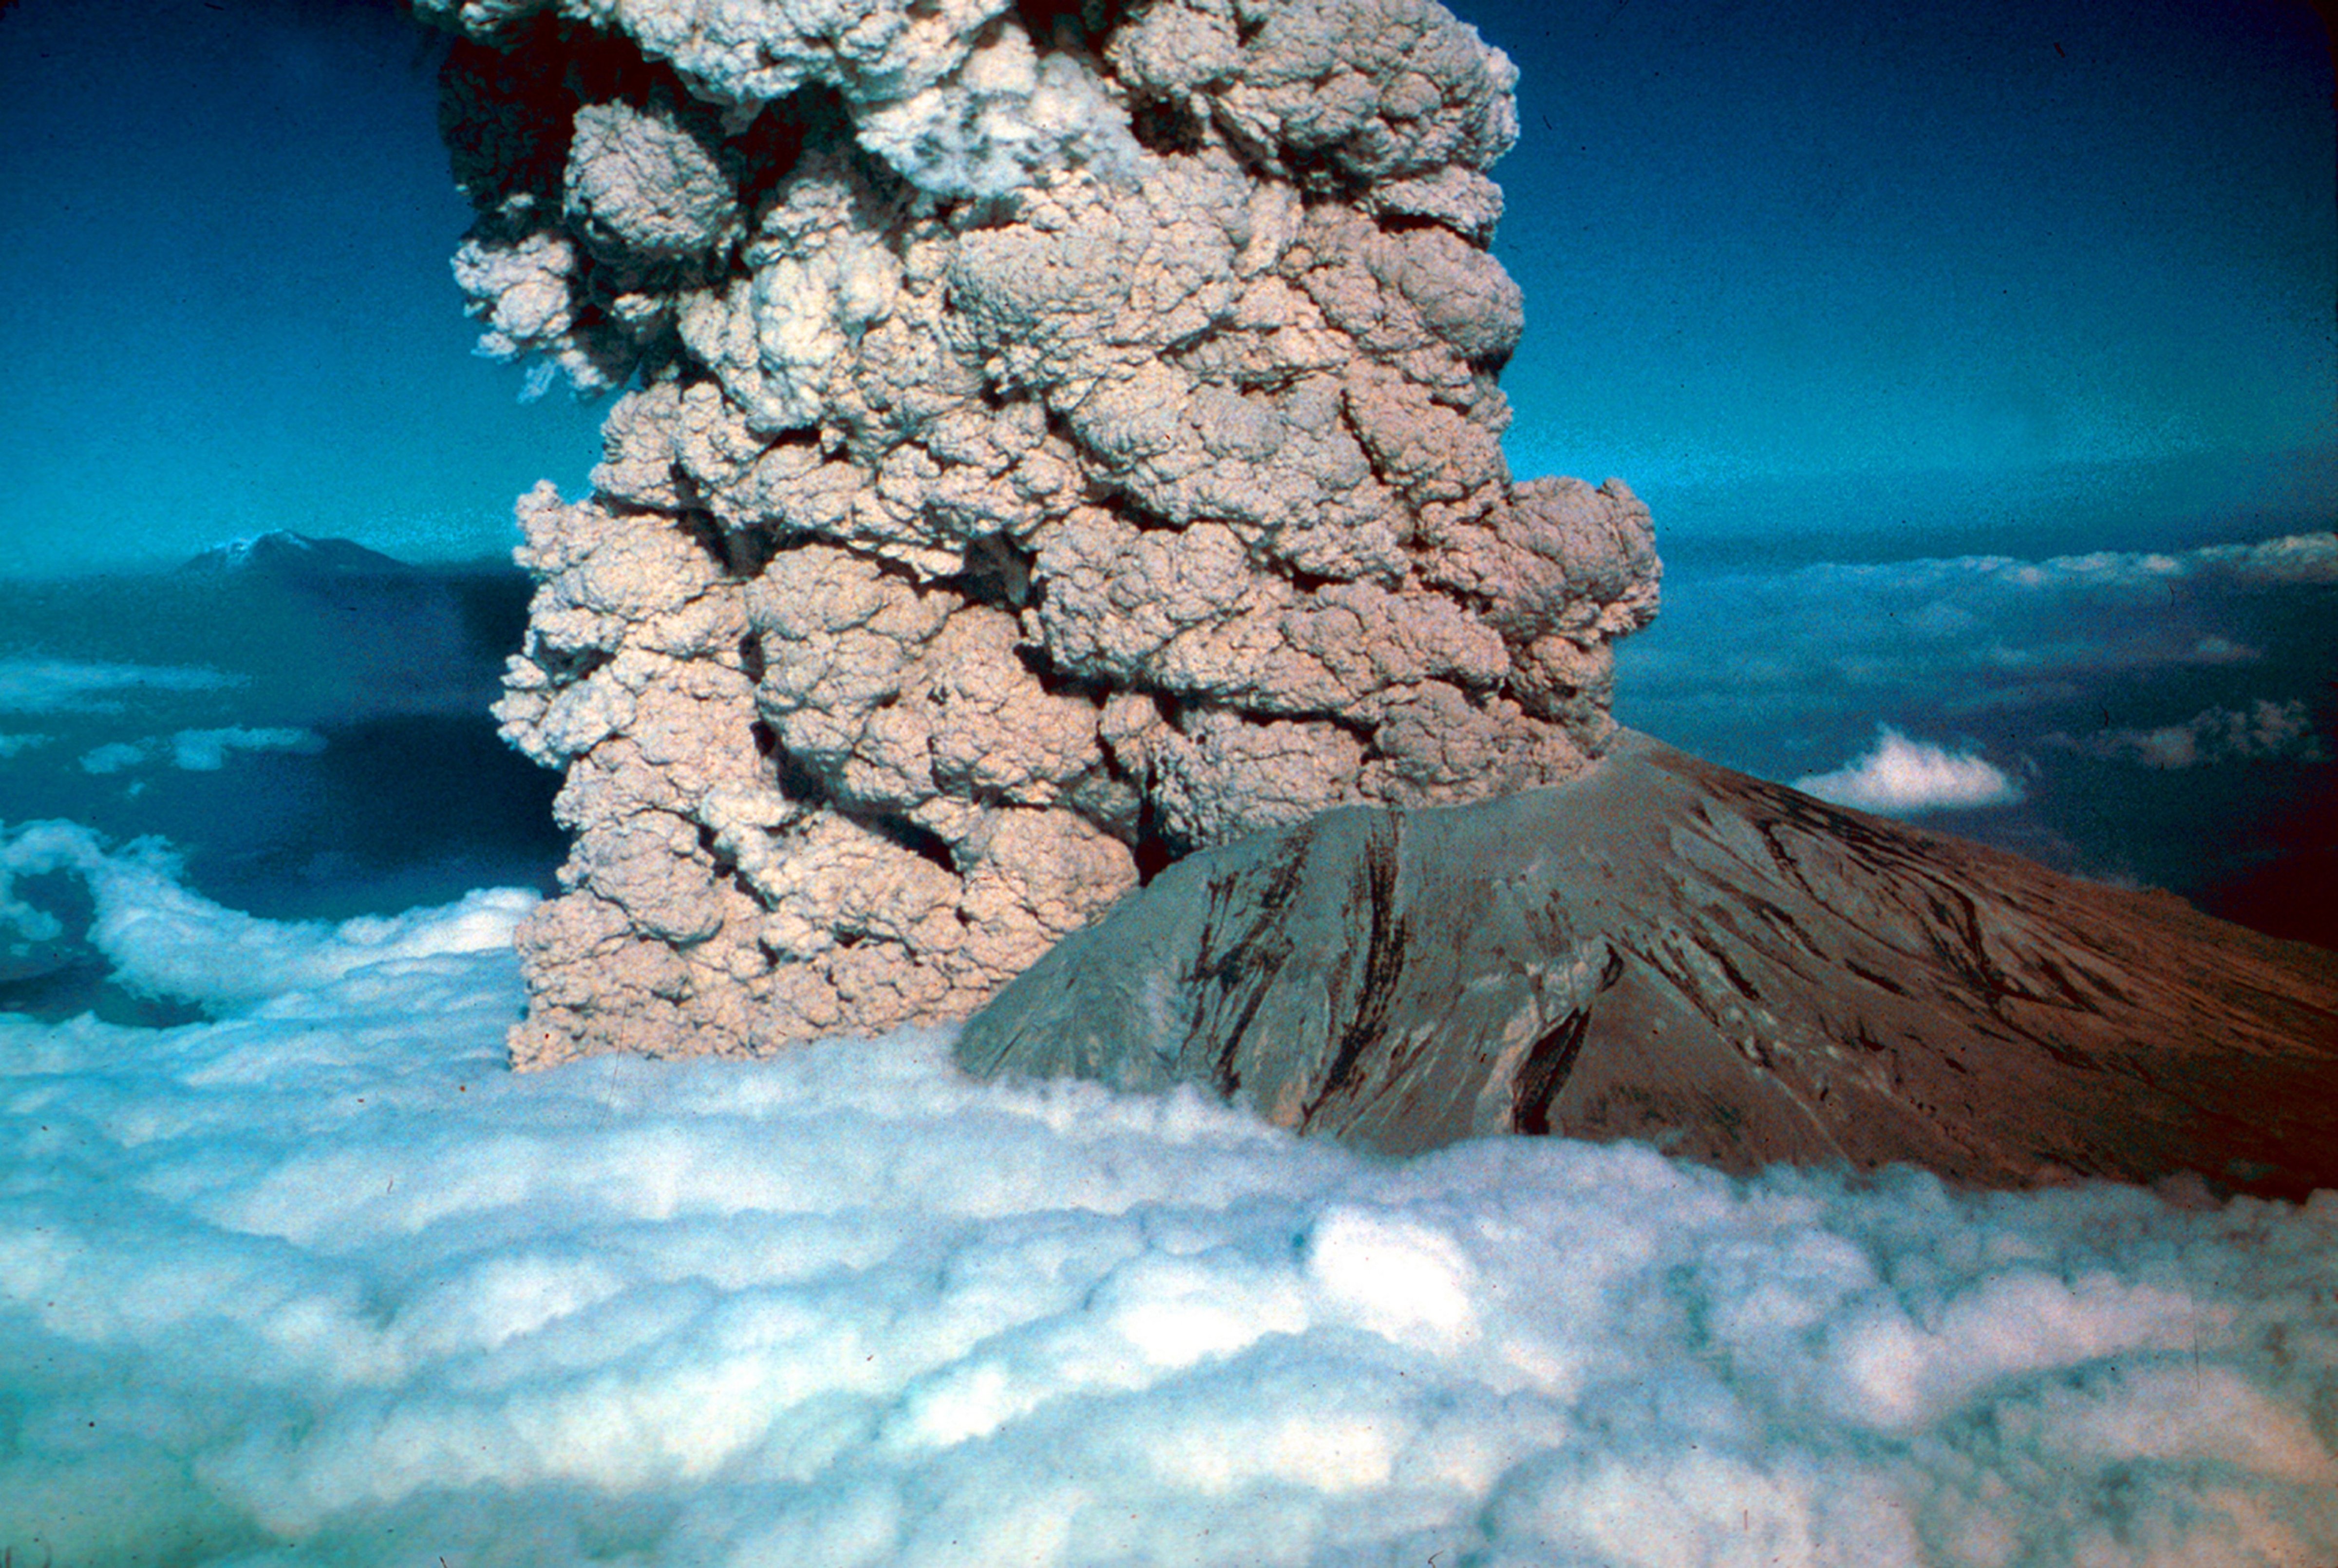 In 1980, a major volcanic eruption occurred at Mount St Helens, a volcano located in state of Washington, in the United States. (Universal History Archive&mdash;UIG via Getty Images)